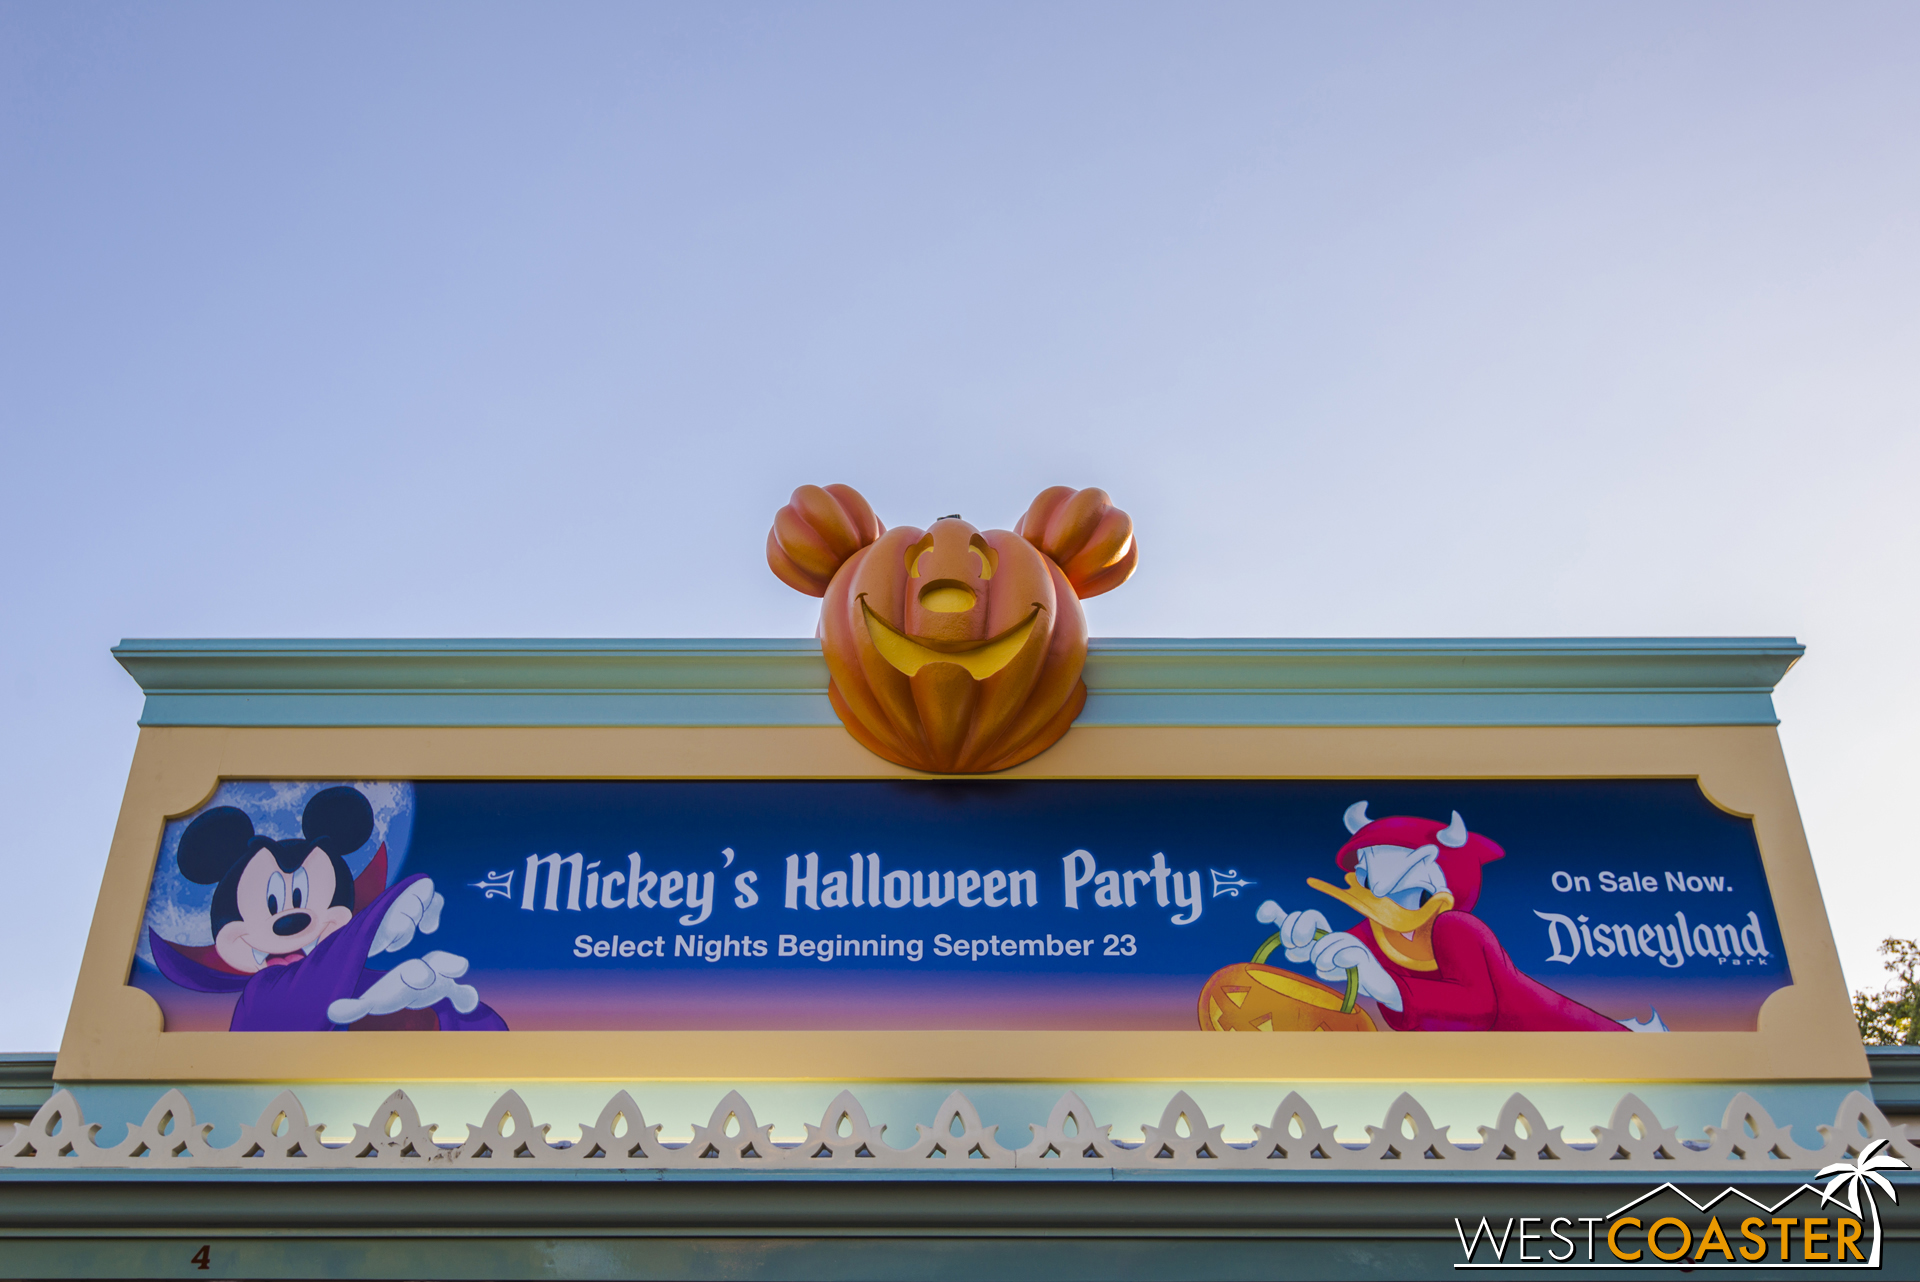  On the other side of the gates, advertisements of Mickey's Halloween Party are up.&nbsp; They are typically Mondays, Wednesdays, and Fridays this year. 